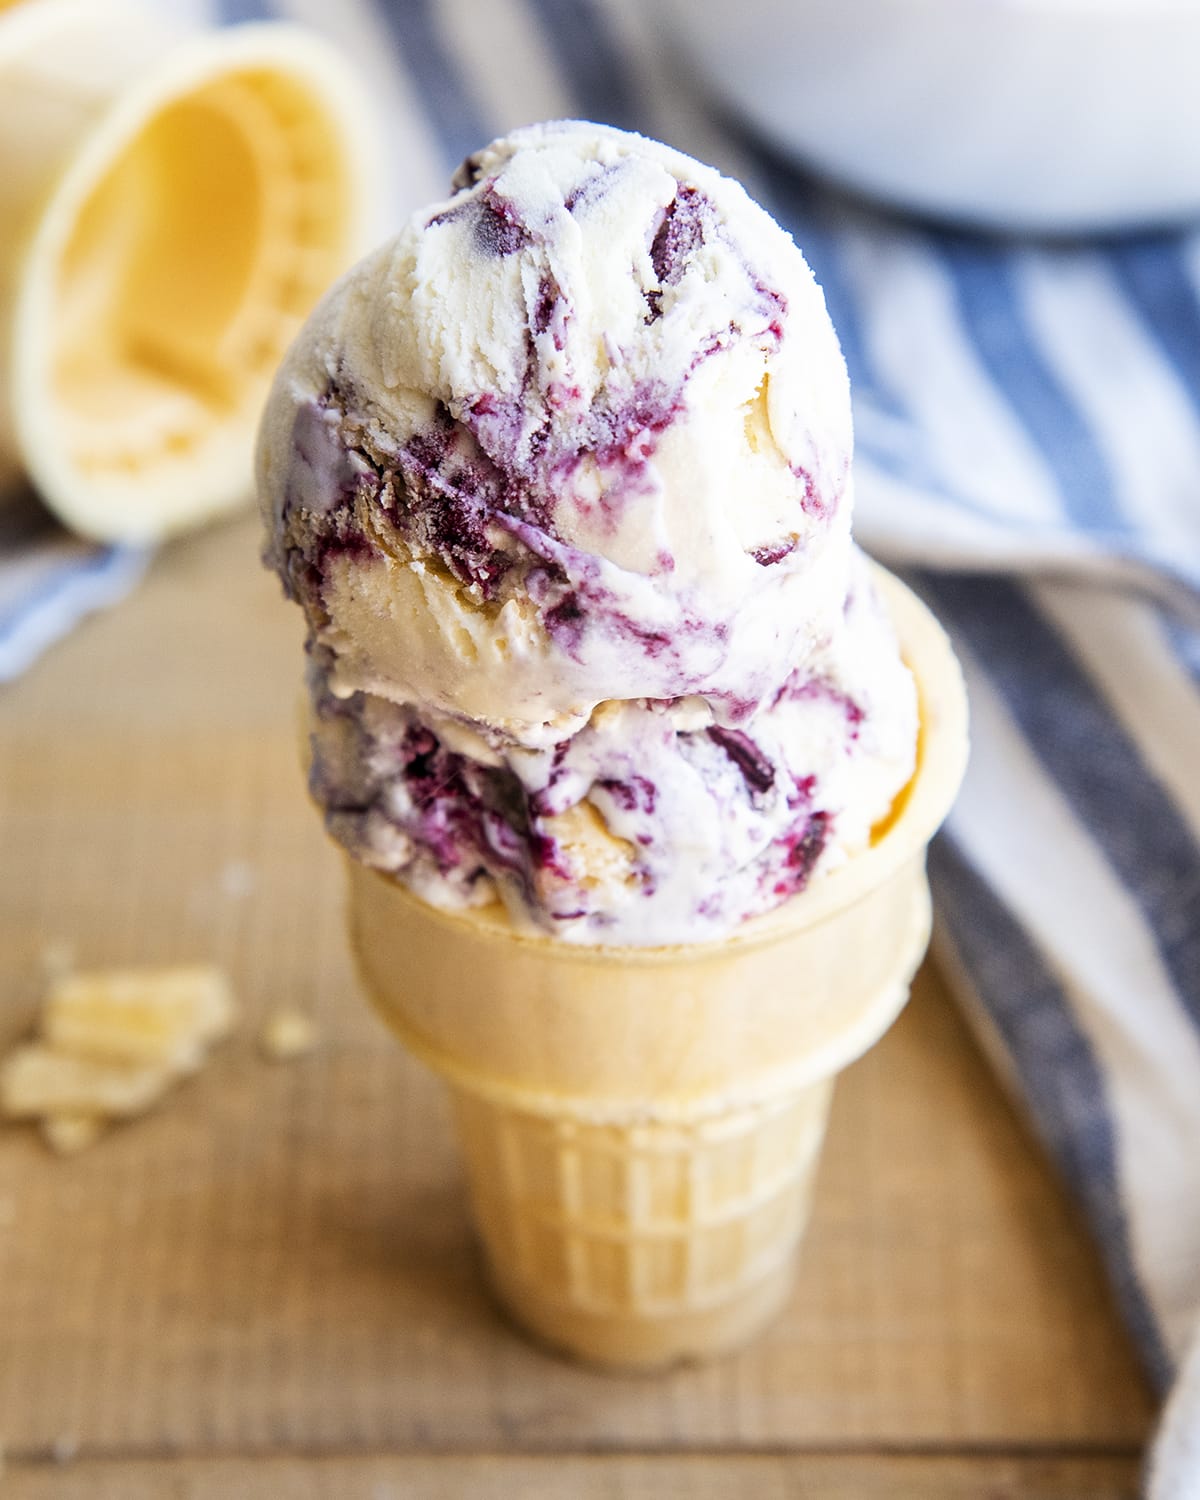 A close up of a blueberry pie ice cream cone with two scoops of ice cream.